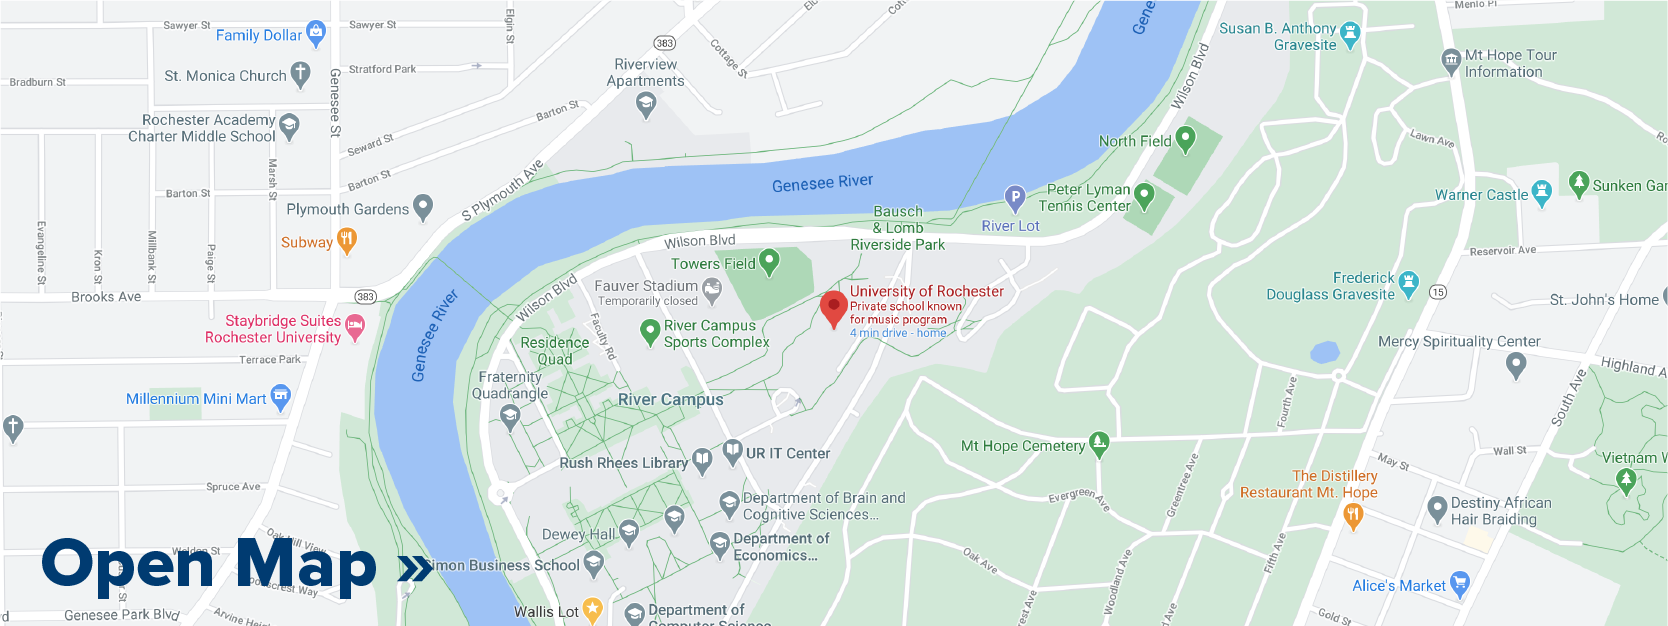 Google Map of University of Rochester River Campus